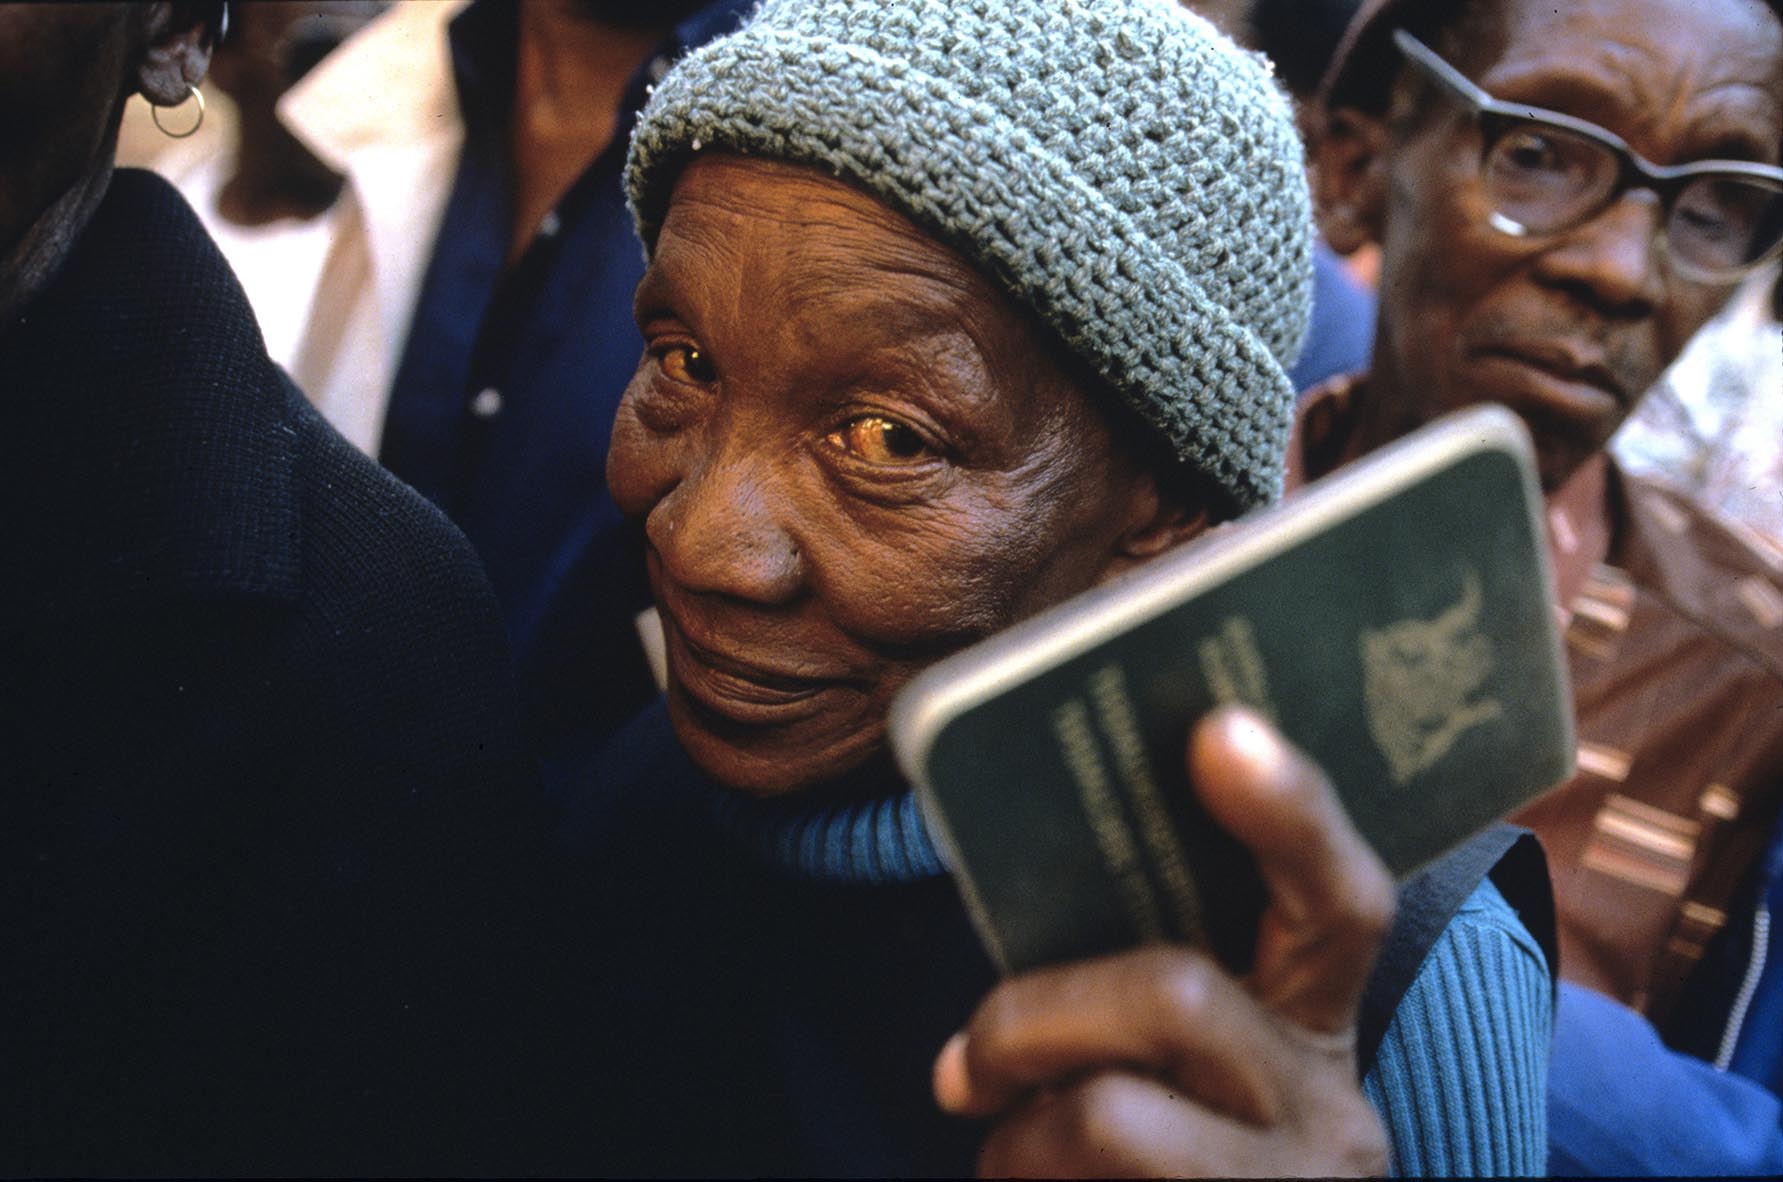 A woman holds her identity papers before casting her ballot at a polling station in Soweto.    Millions of South Africans voted in the nation's first free and democratic general election,  marking the end of centuries of apartheid rule.  Nelson Mandela of the African National Congress (ANC) was elected as the first black President of South Africa.